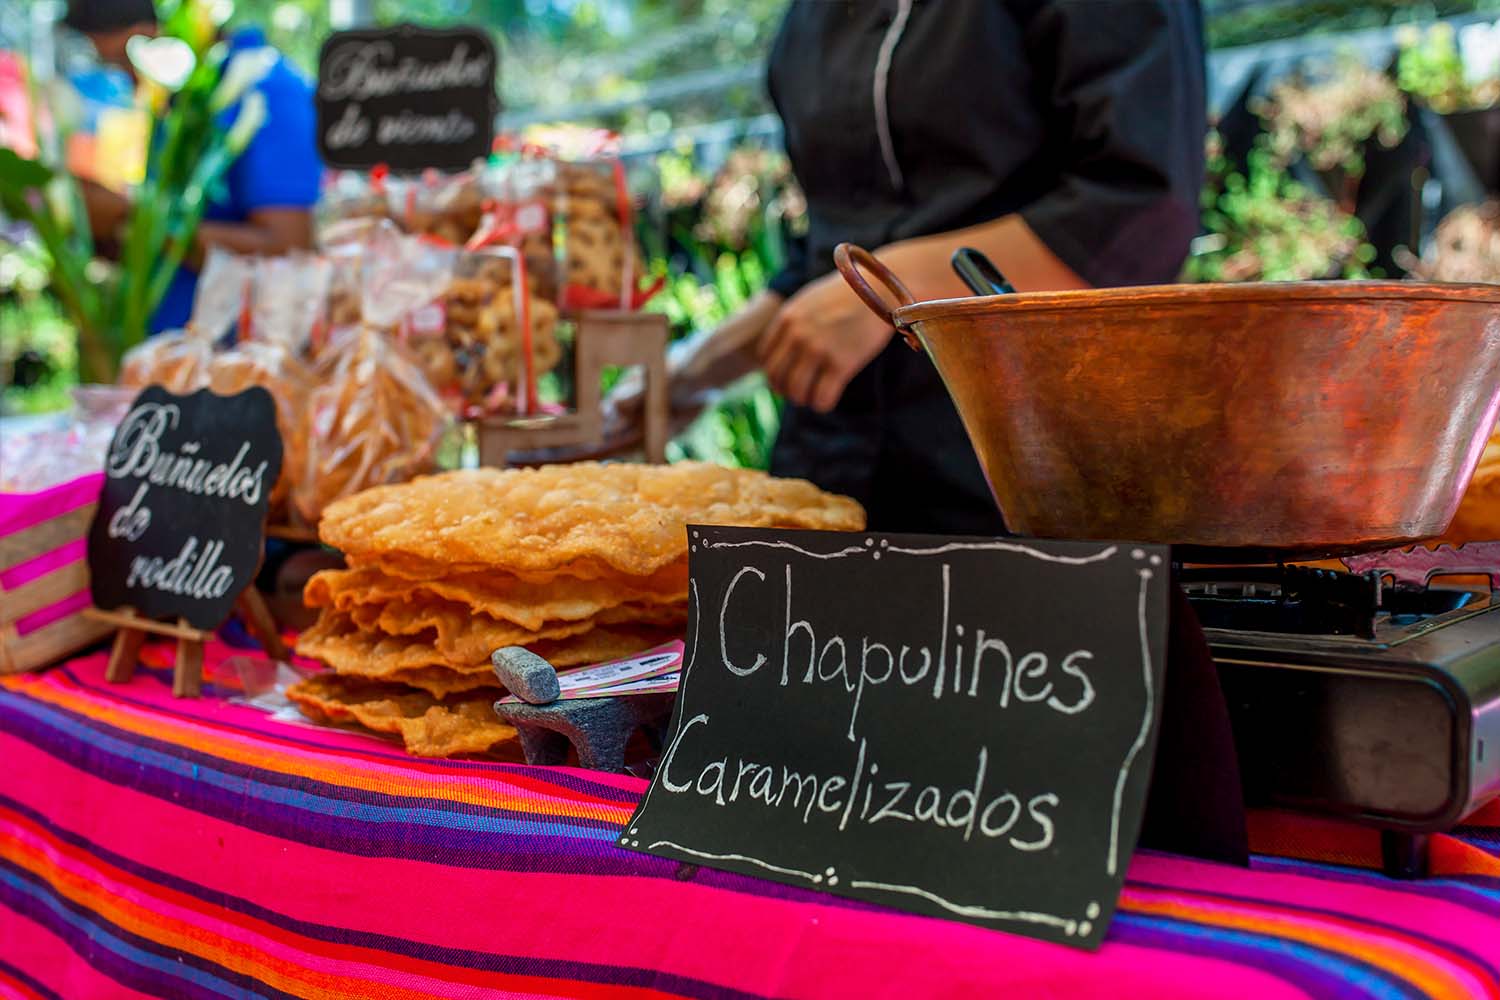 Scenes from a Mexico City food market